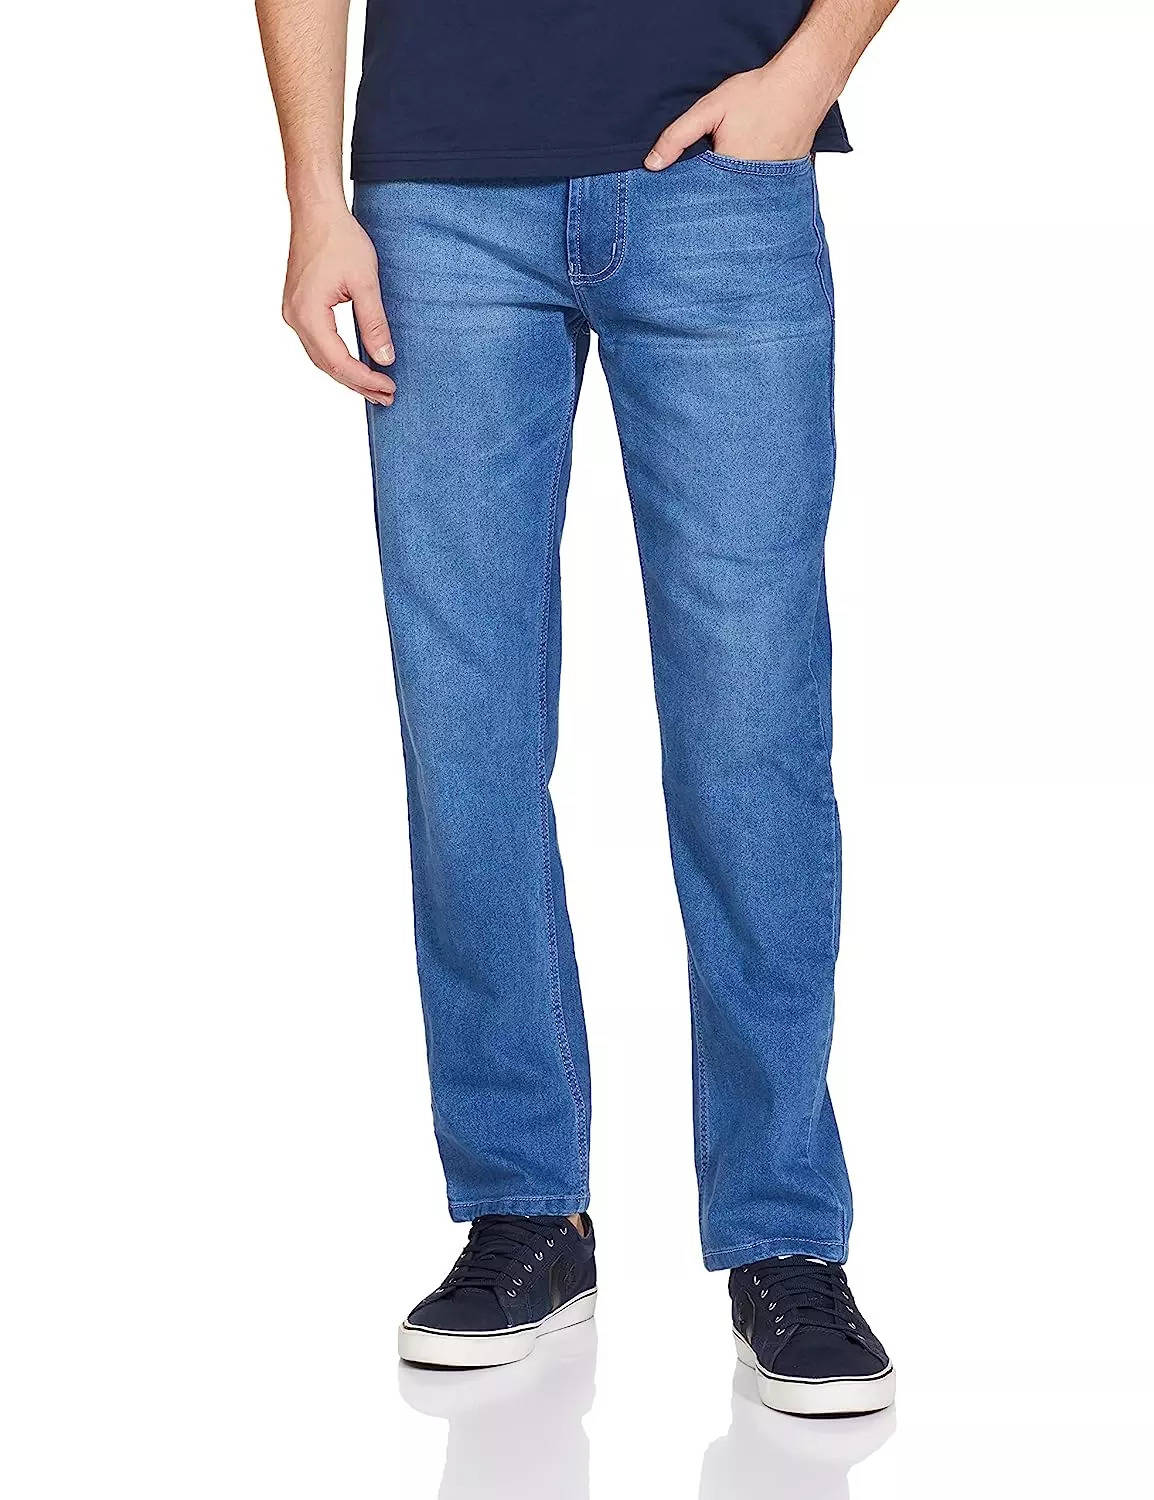 Jeans for Men Under 2000: 6 Best Jeans for Men Under 2000 in India to ...